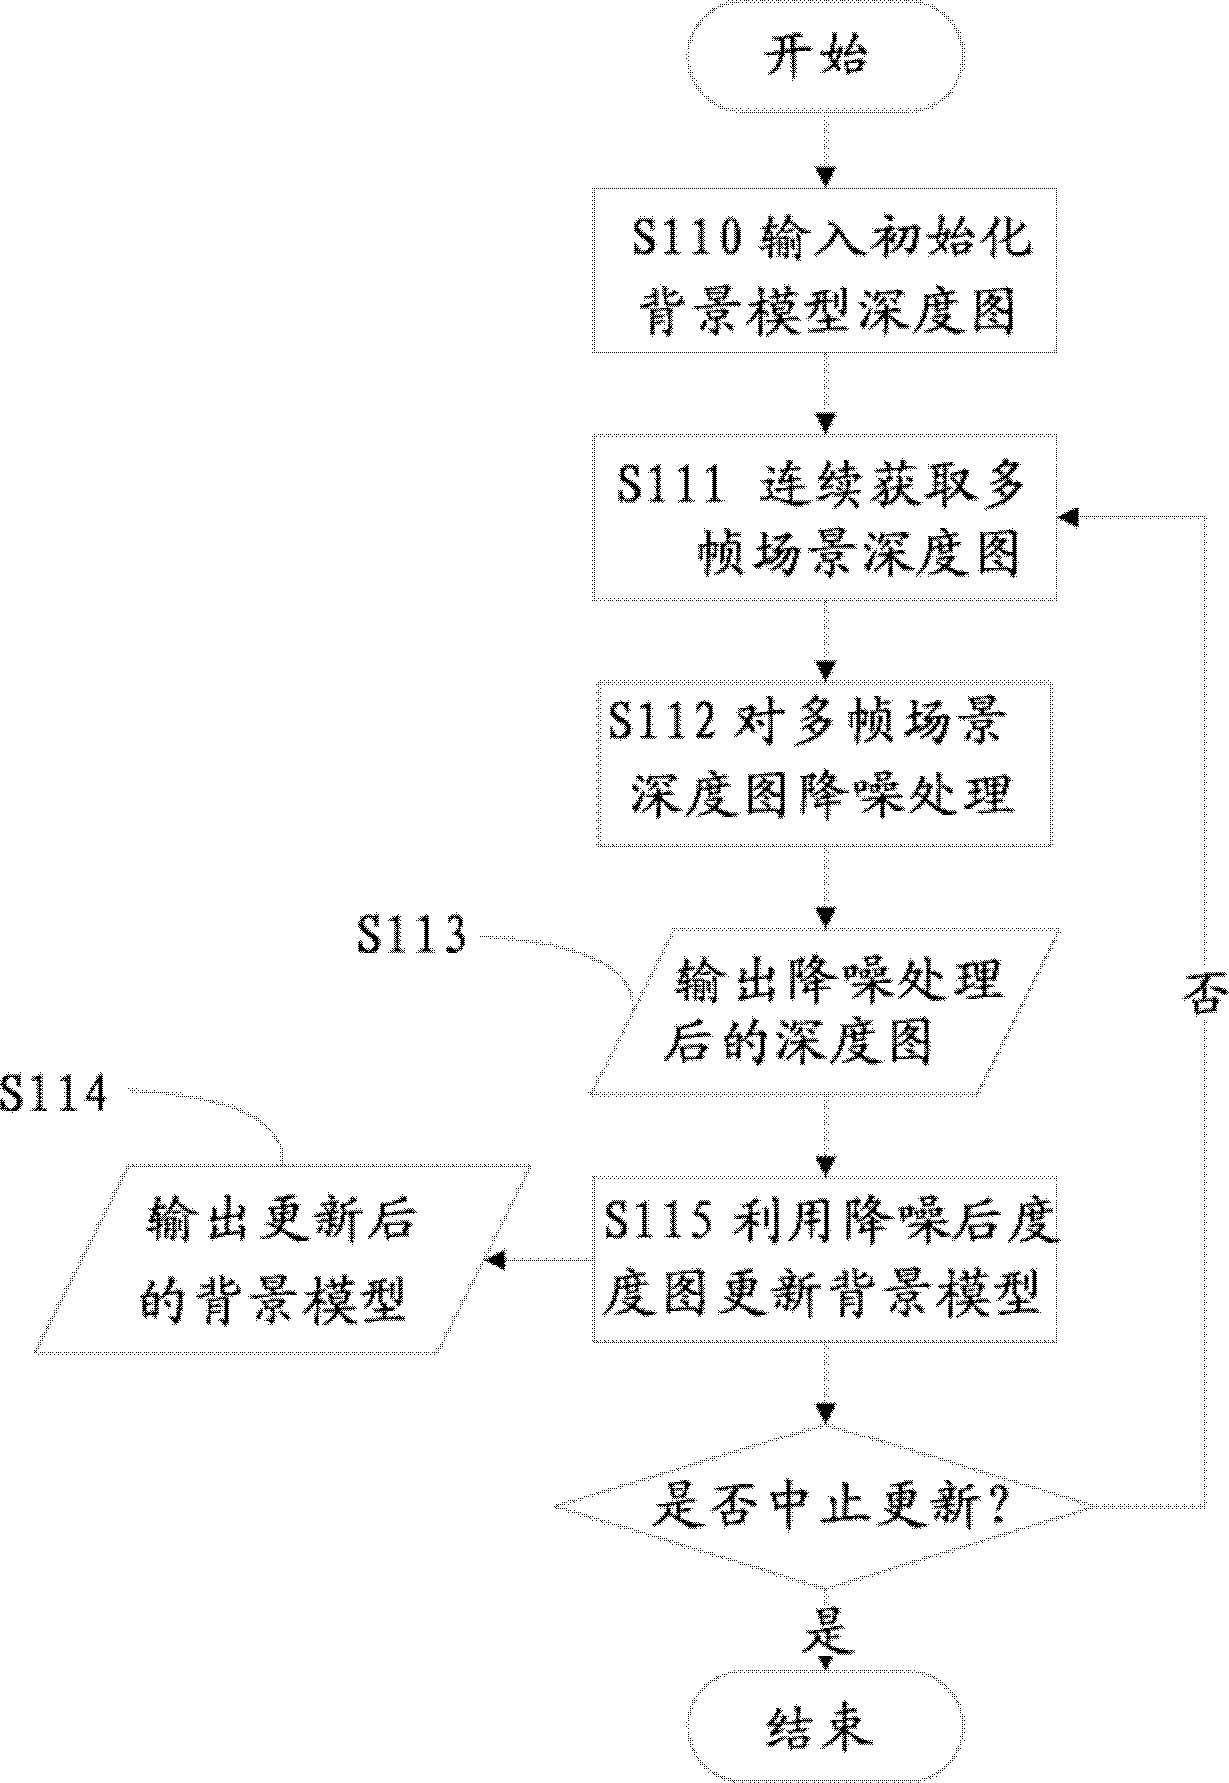 Method and system for detecting and verifying specific foreground objects